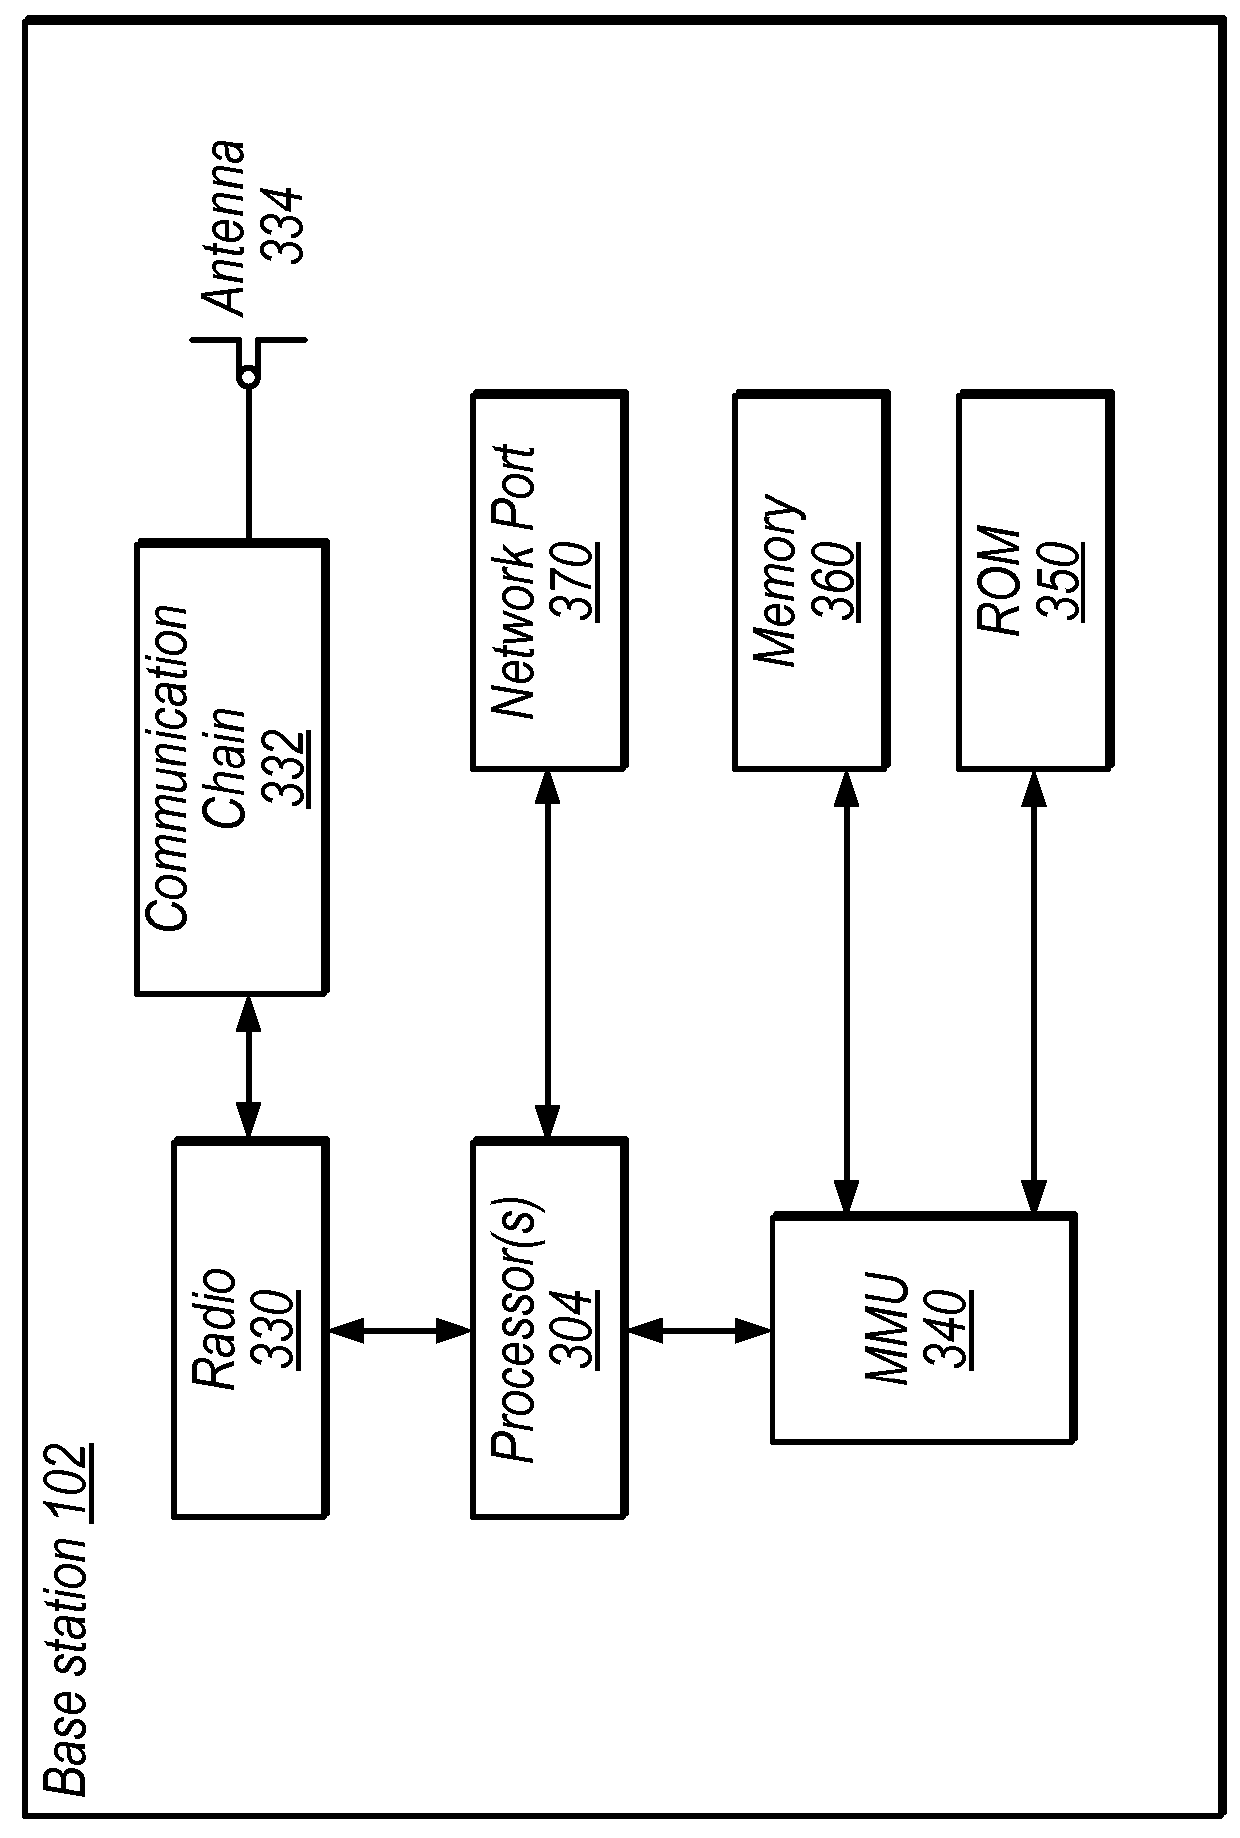 Shared Spectrum Access for Broadcast and Bi-Directional, Packet-Switched Communications